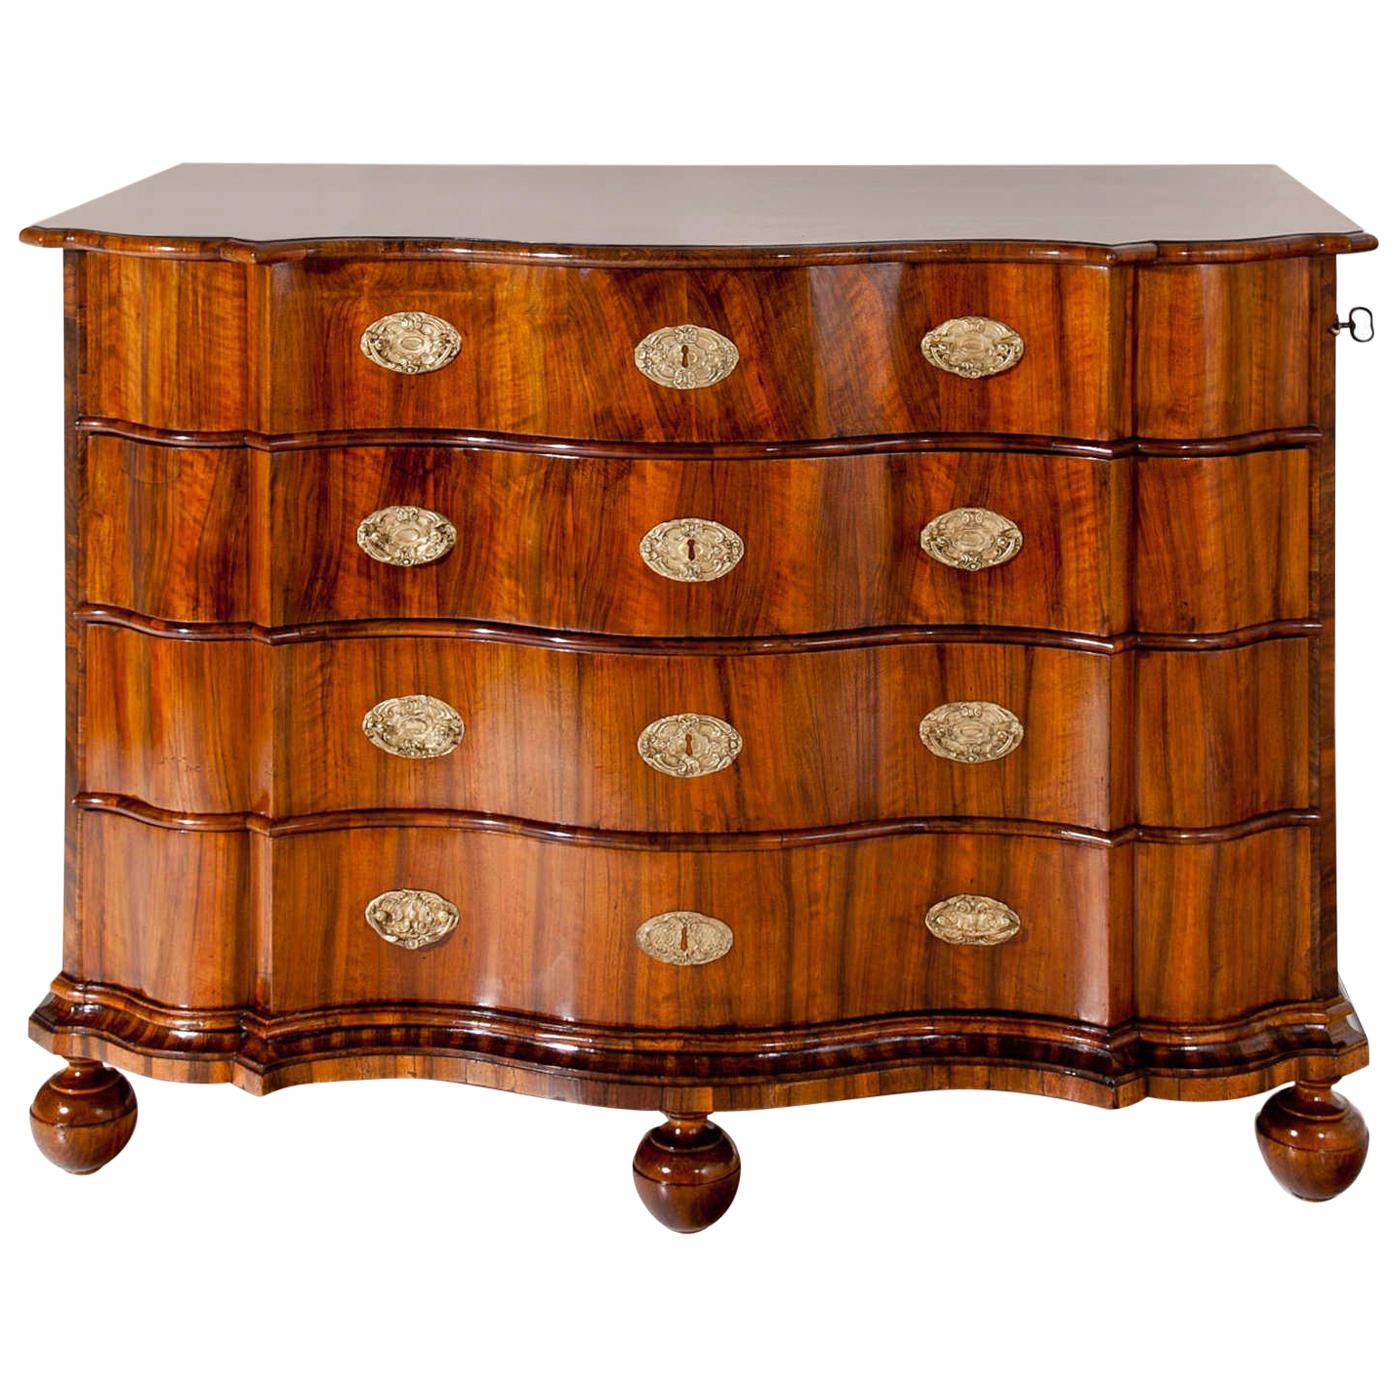 Baroque Chests of Drawers, France, circa 1730